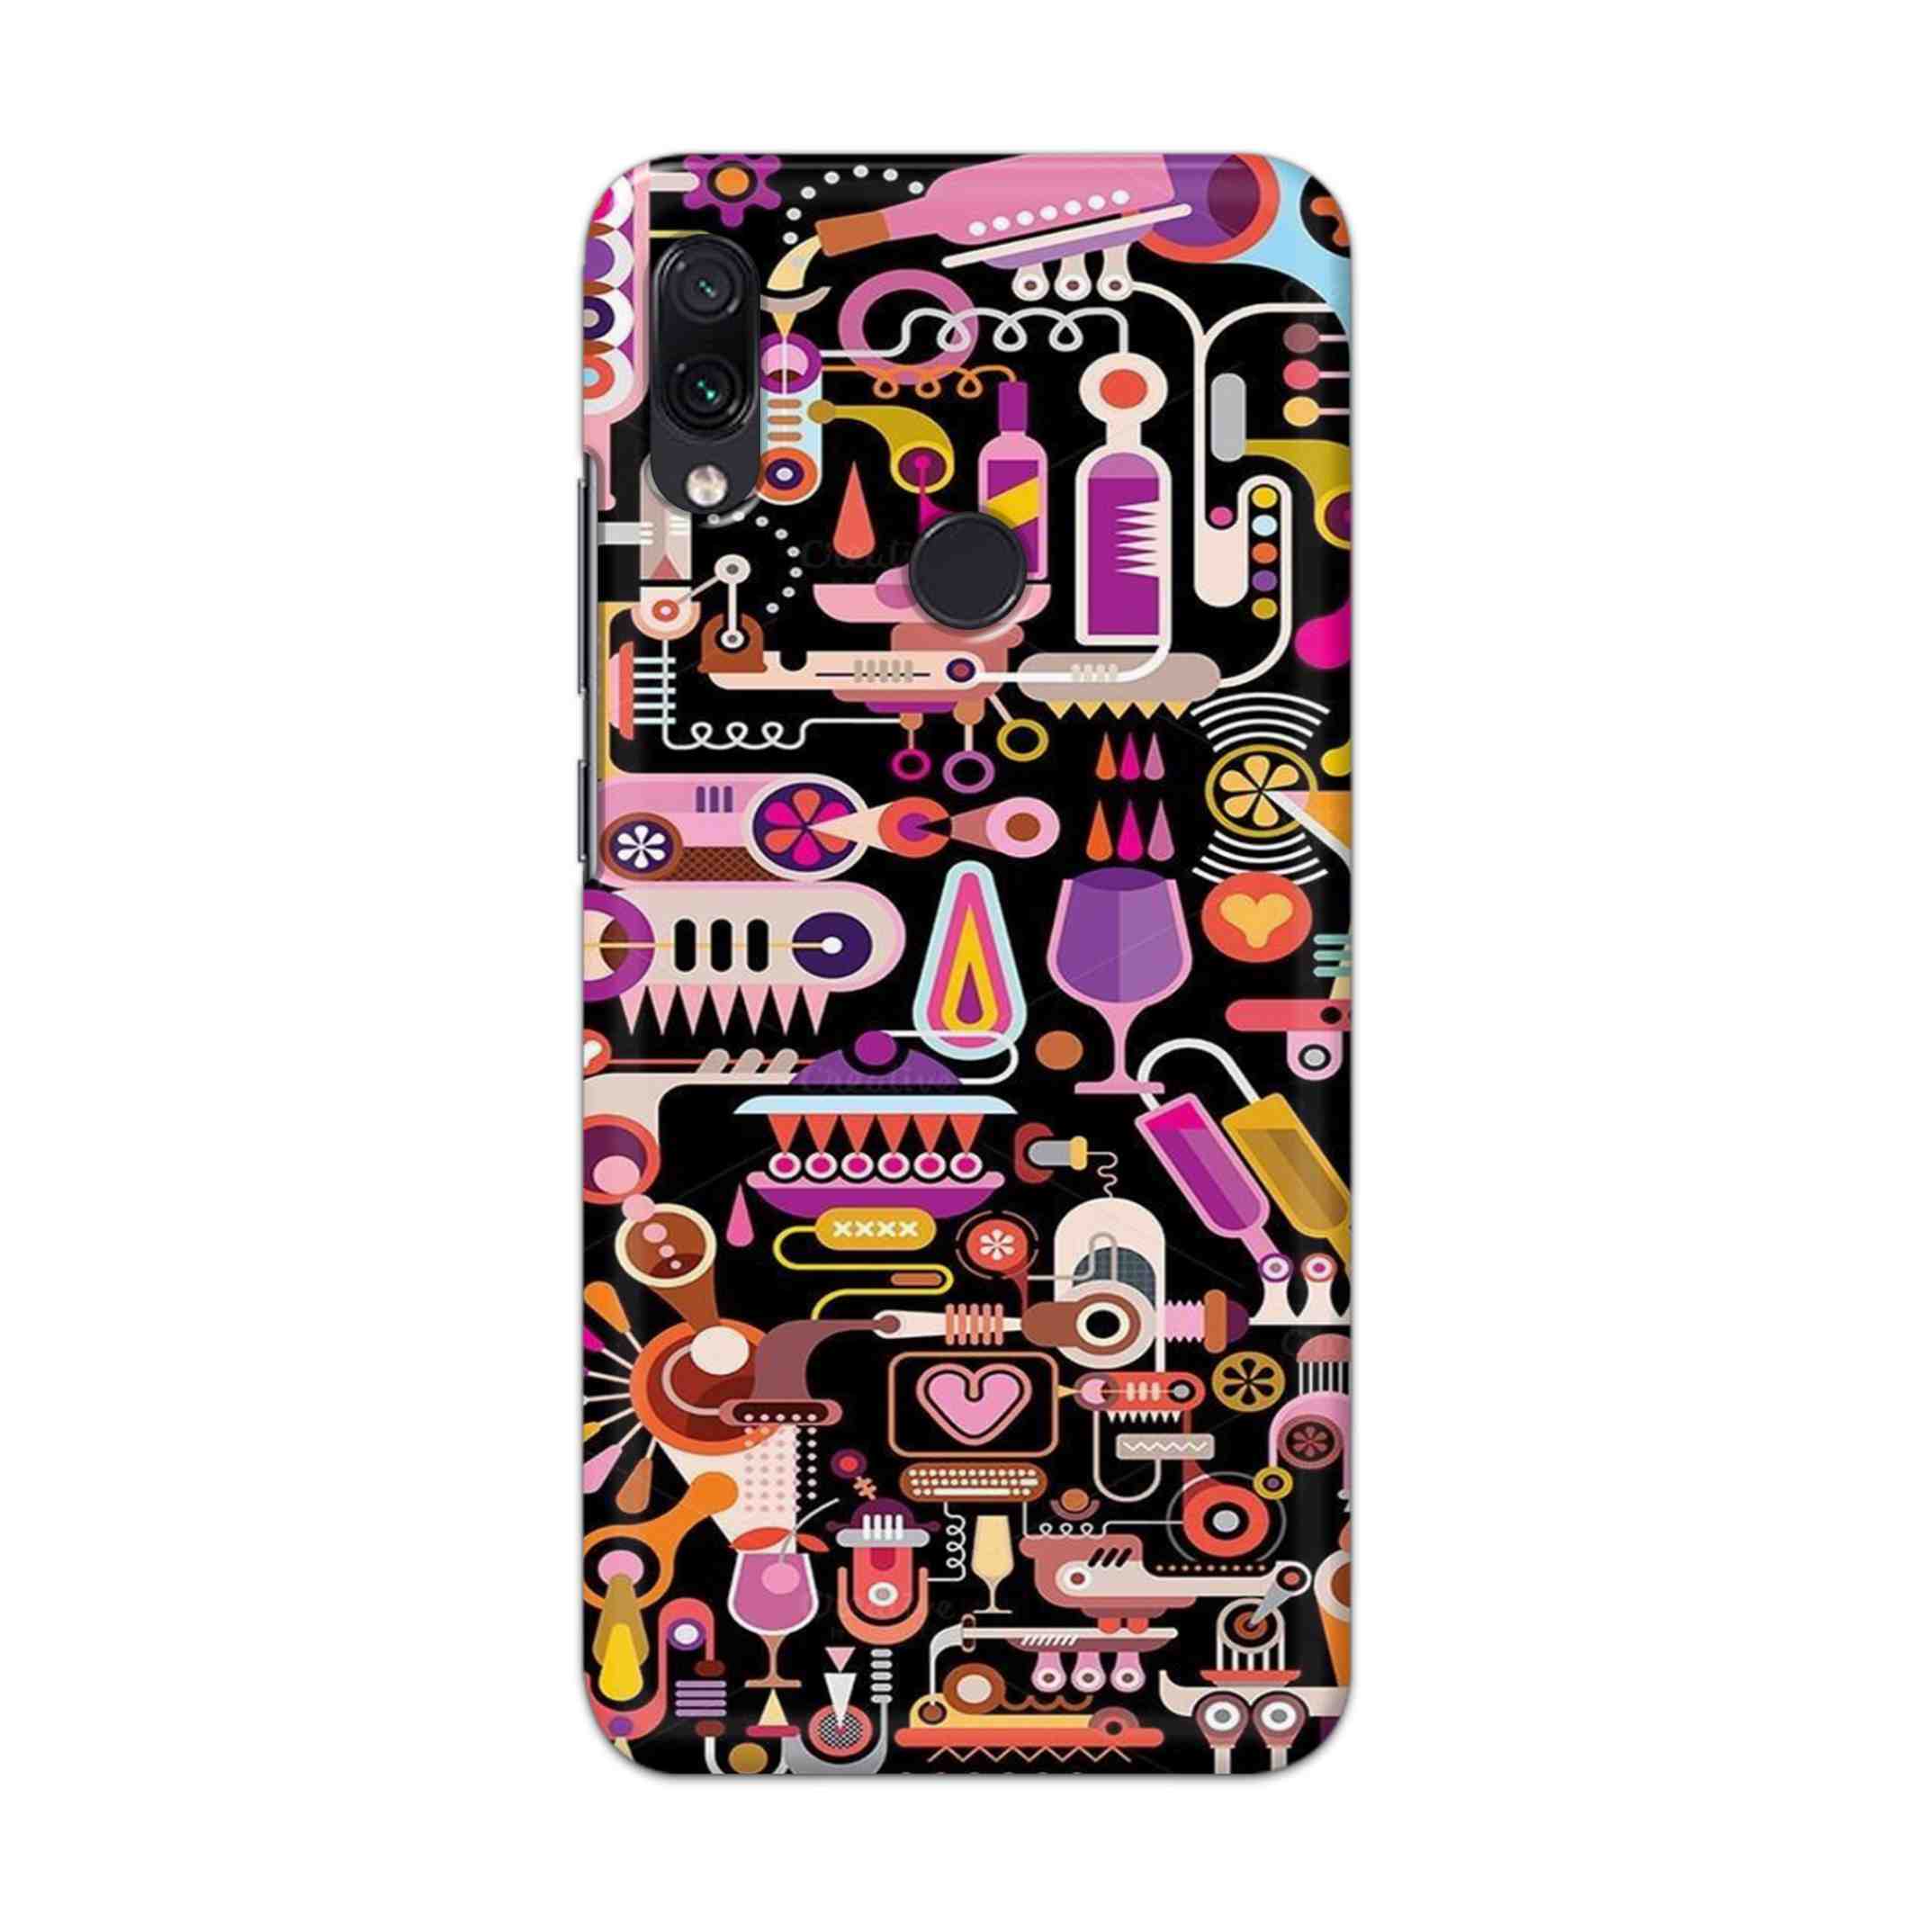 Buy Lab Art Hard Back Mobile Phone Case Cover For Redmi Note 7 / Note 7 Pro Online